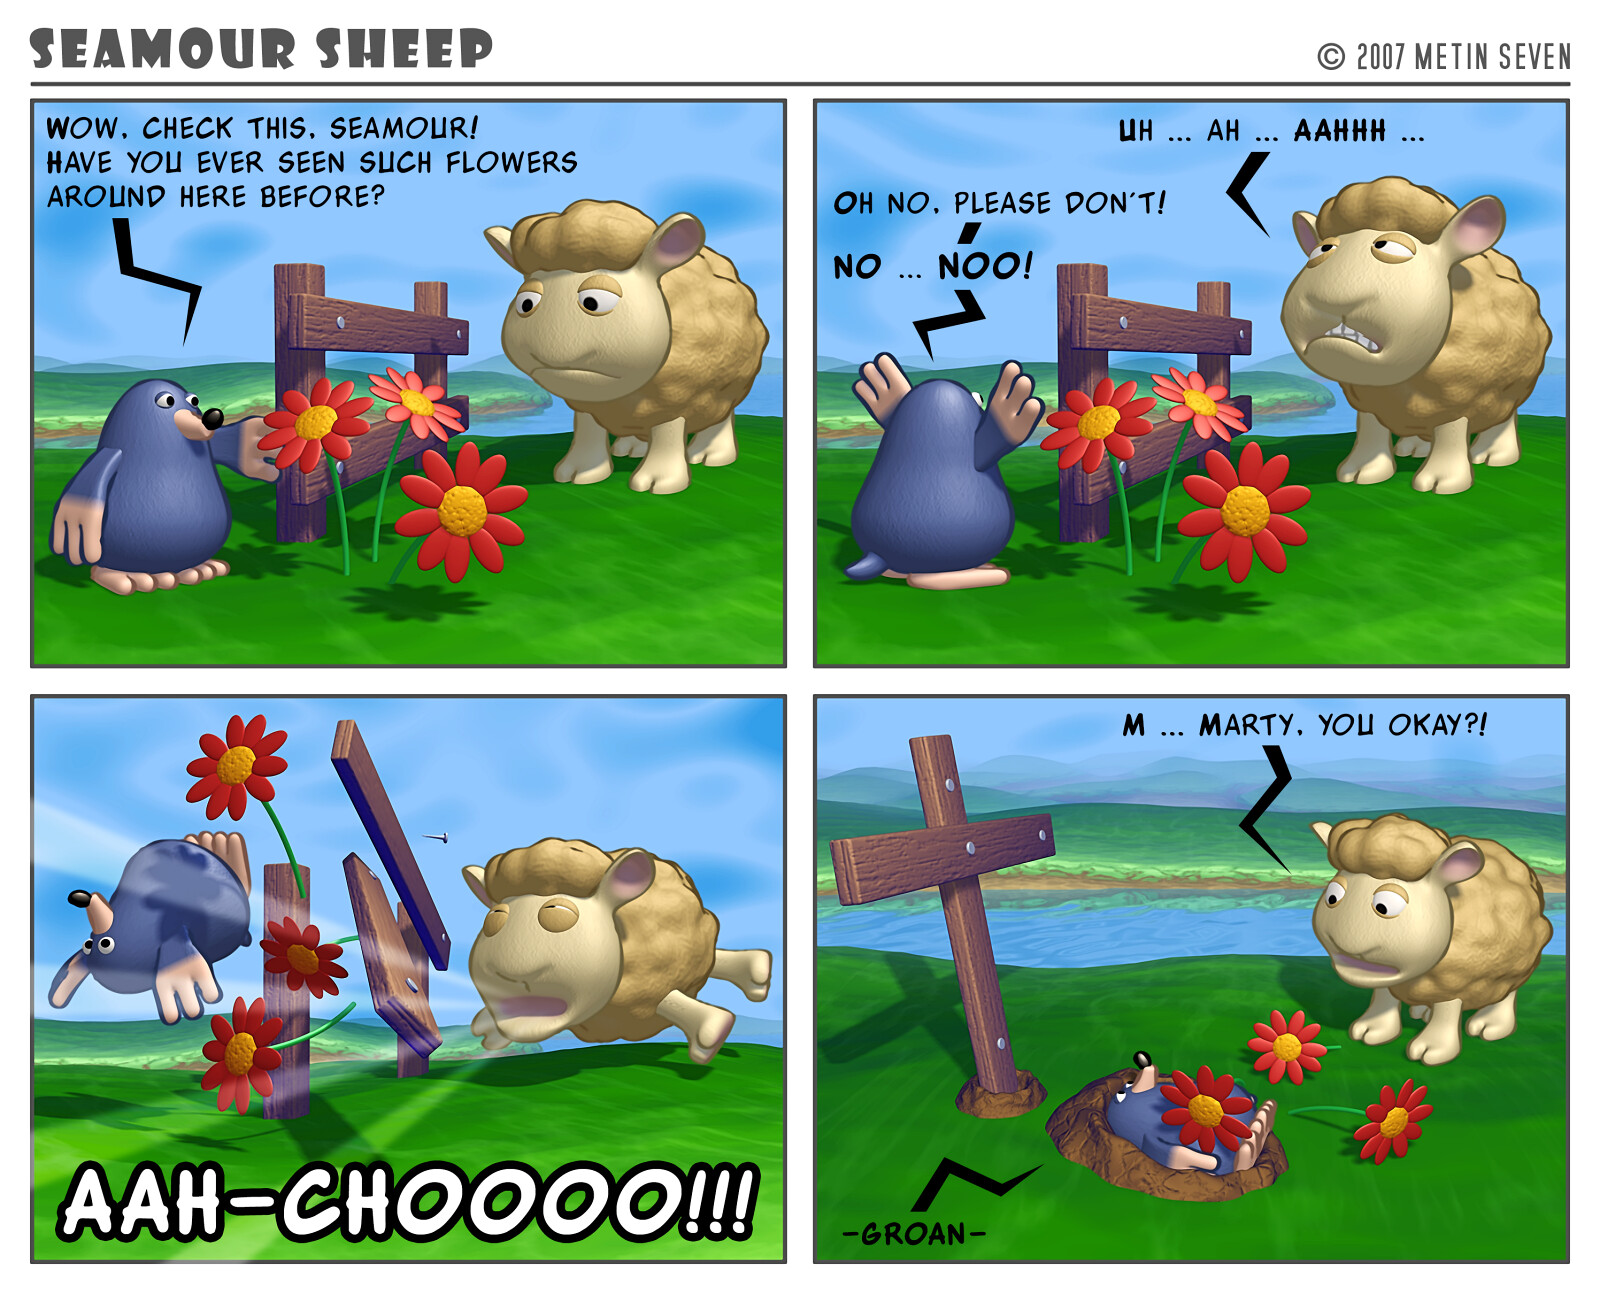 Seamour Sheep and Marty Mole comic strip episode: Allergy